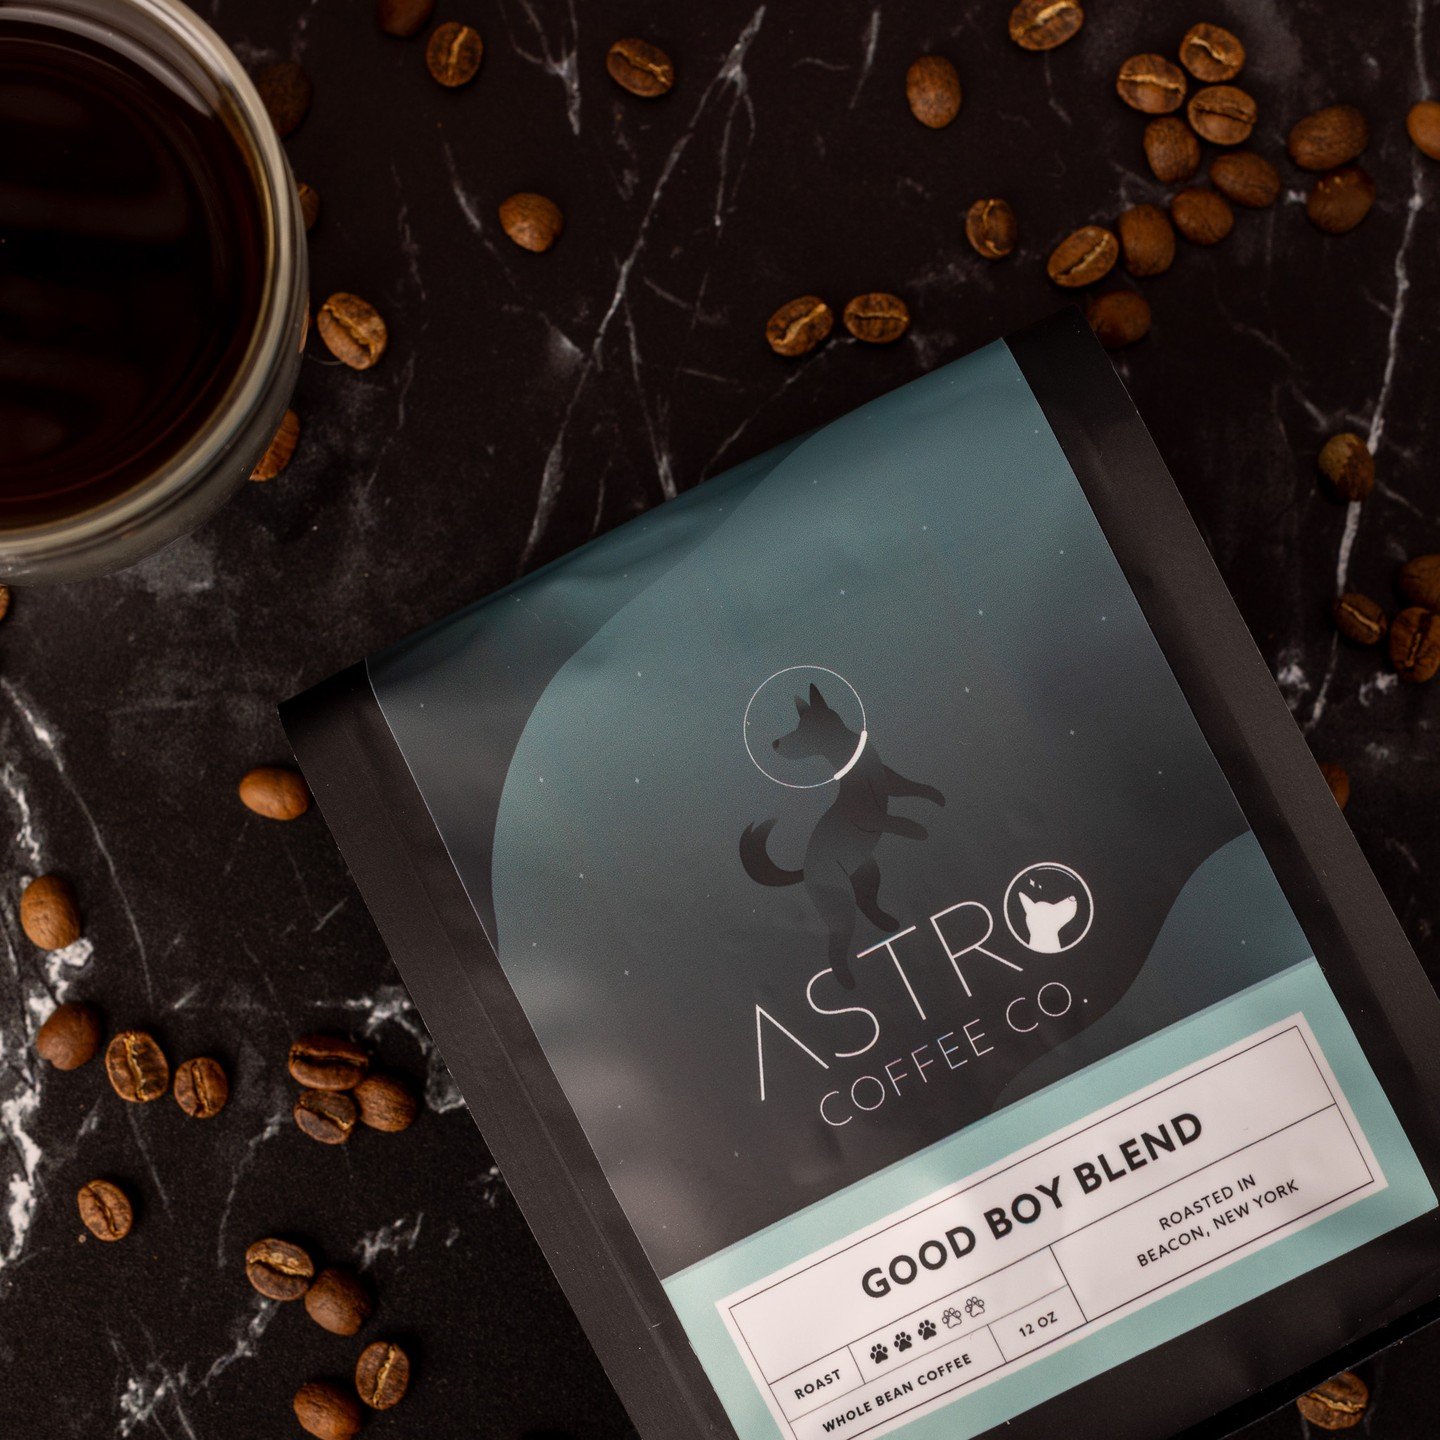 Fuel your day and support local animal shelters with our Good Boy Blend! 

This delicious, ethically sourced 12oz bag of coffee is packed with flavor and feel-good vibes. 

And if delicious a cup of coffee in the morning isn't reason enough, with eve